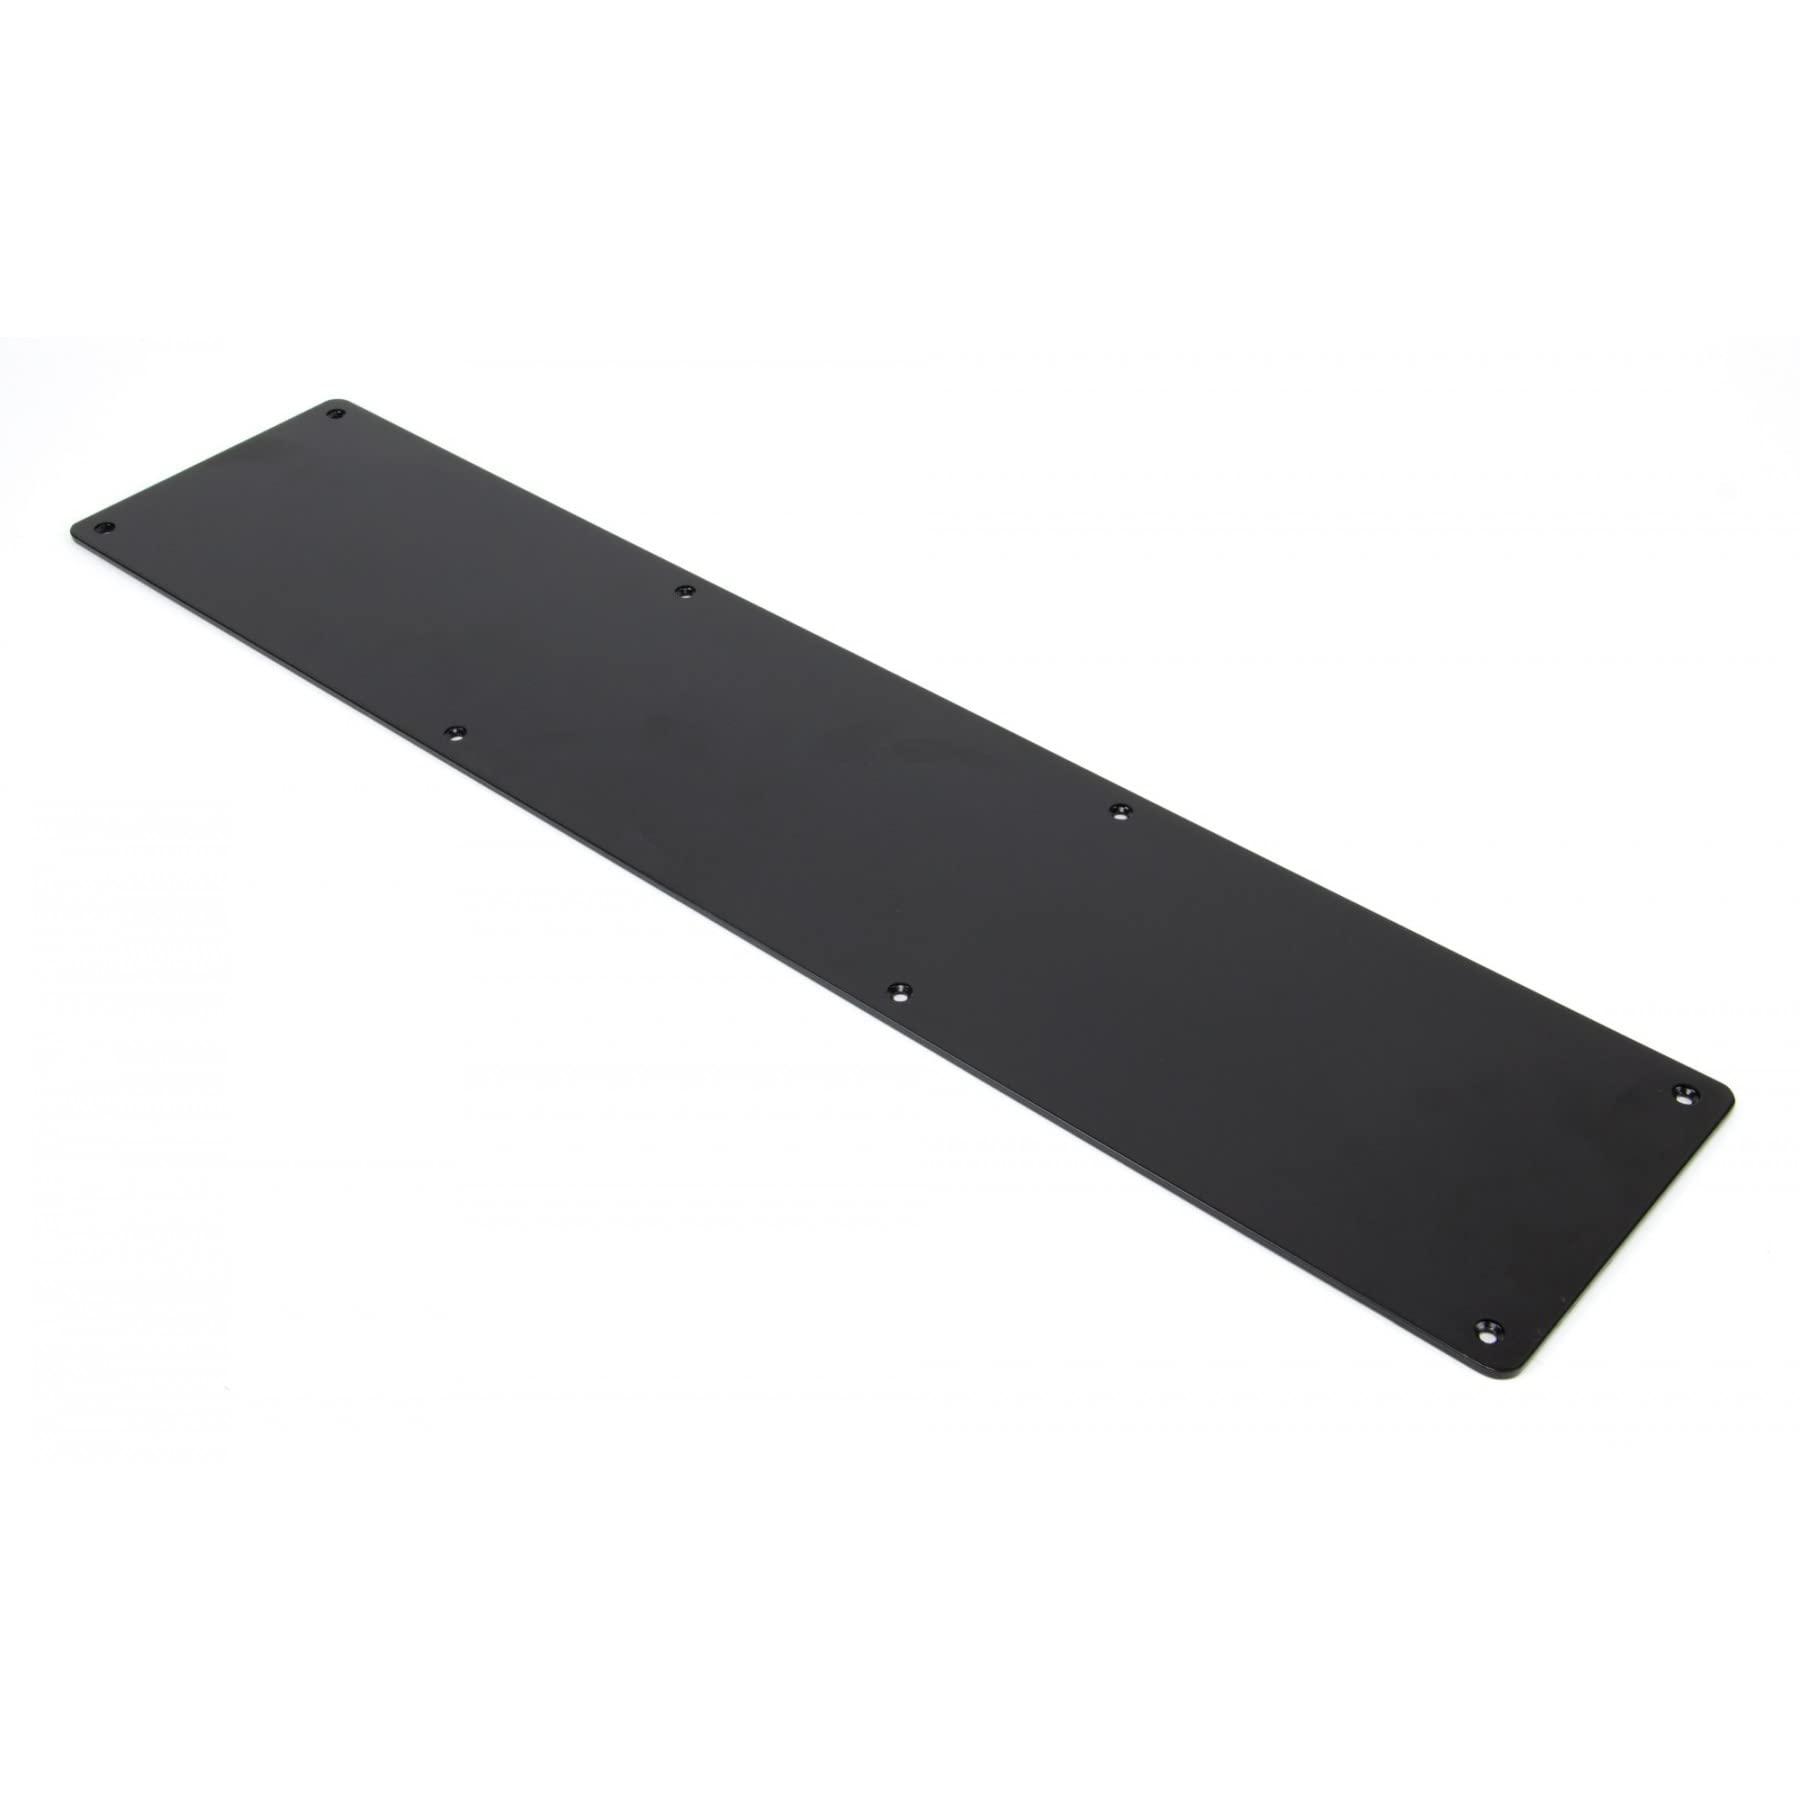 don-jo-architectural metal door kick plate (bk) black finish-12" x 28" inches-for 30" (width) doors